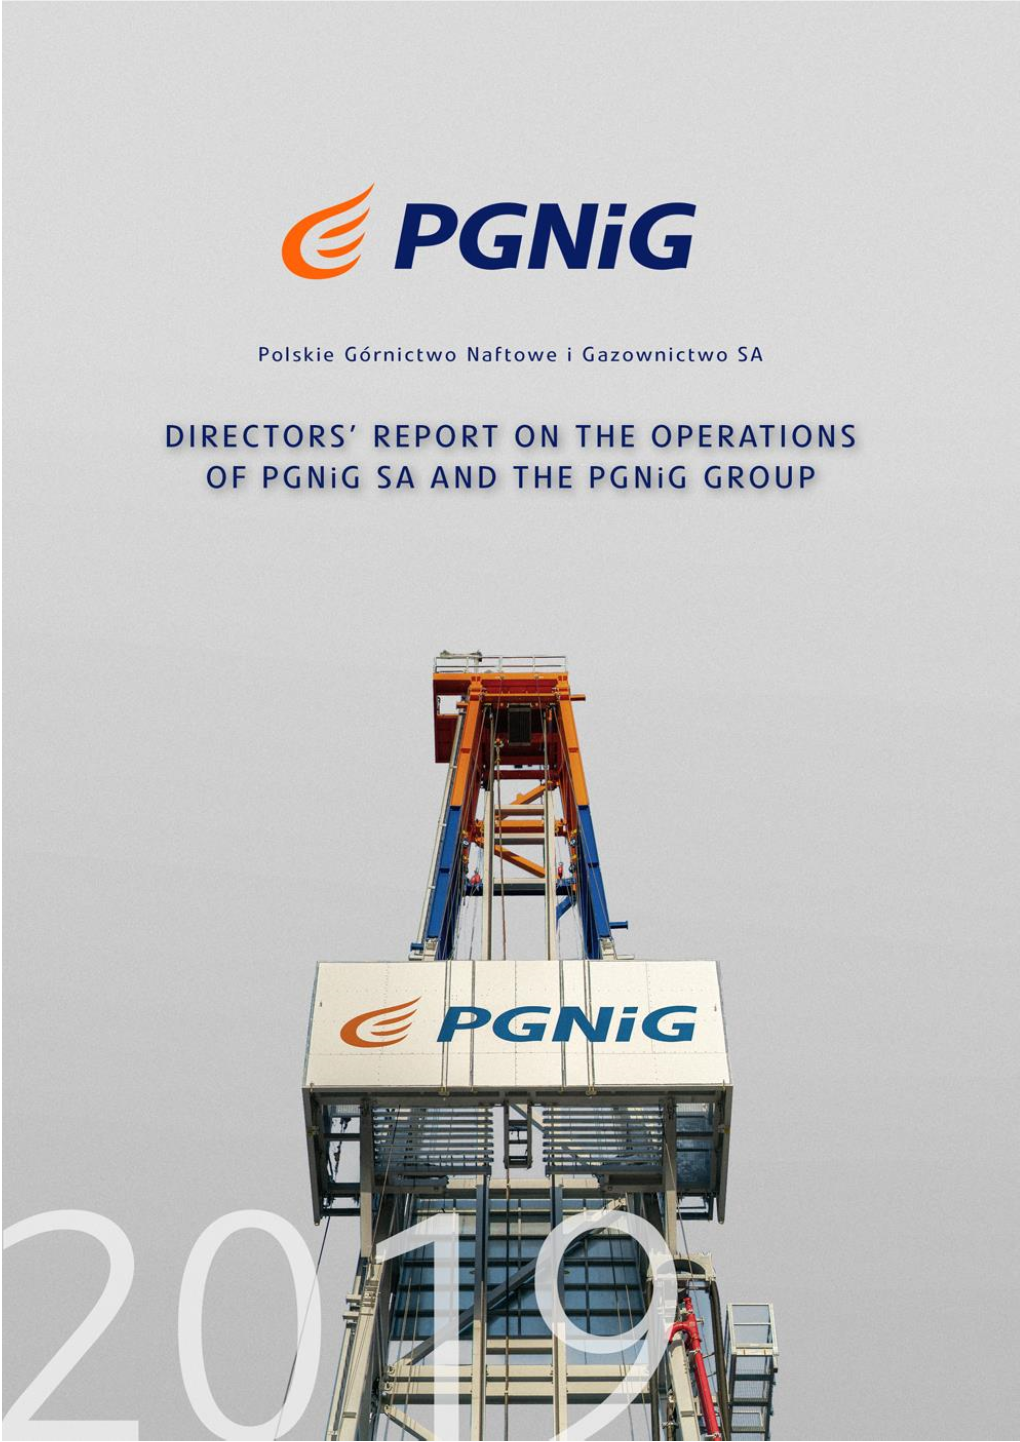 Pgnig GROUP DIRECTORS' REPORT on the OPERATIONS